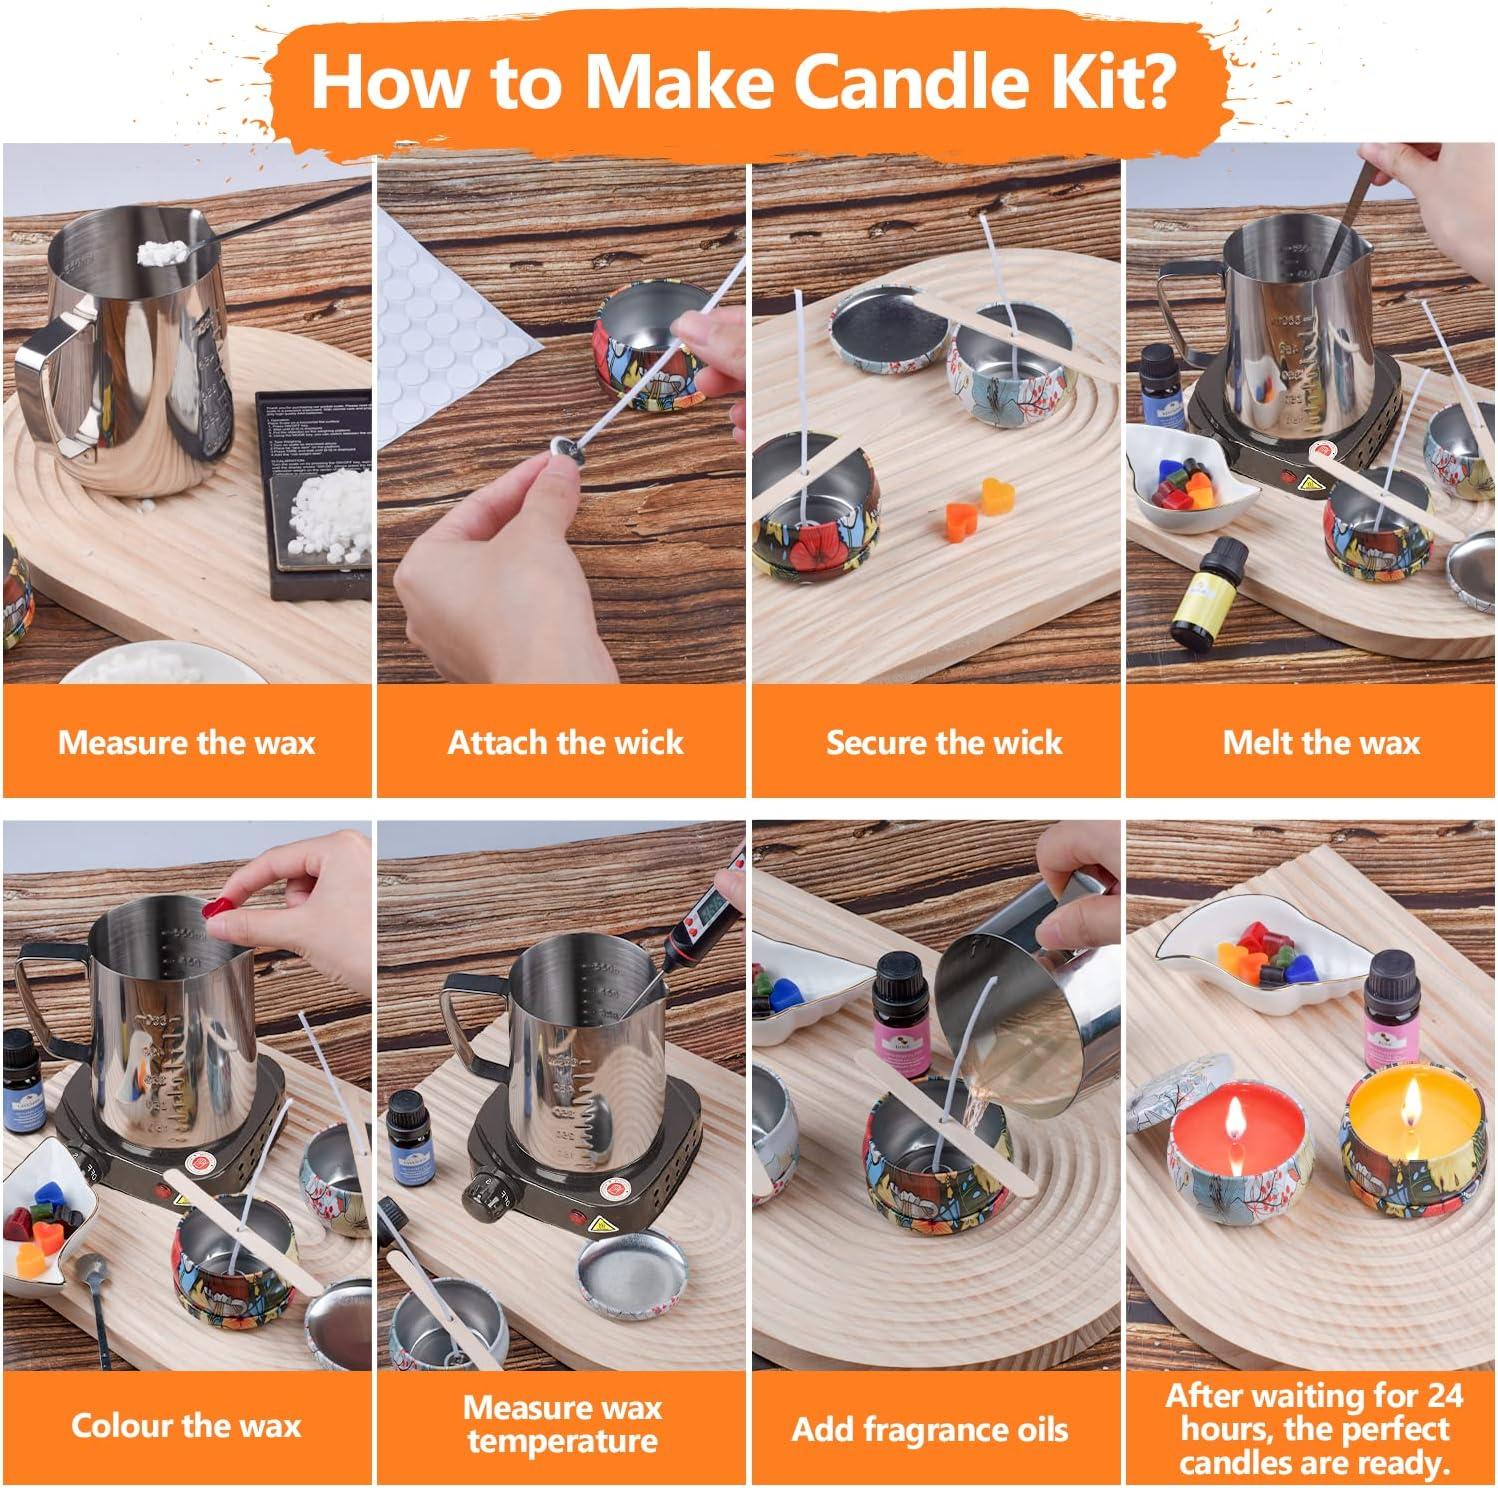 Anicco Candle Making Kit,Contains Soy Wax, Exquisite Jars,DIY Candle Making Kit for Beginners, Children and Adults, Perfect As H